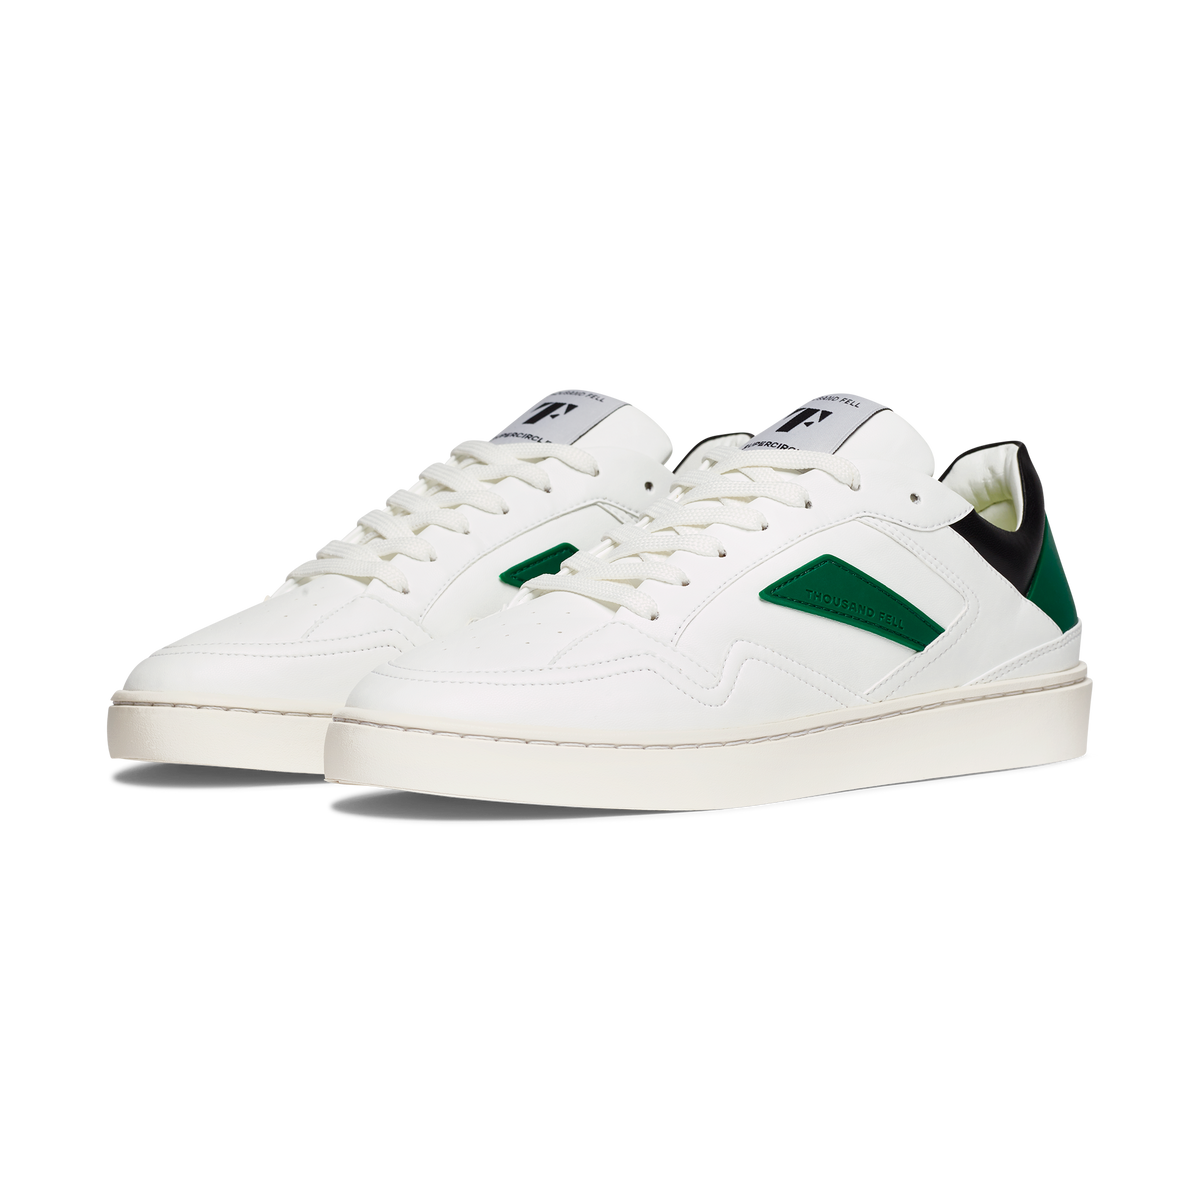 white eco friendly sneakers with black and green details ethical alternative to nike 